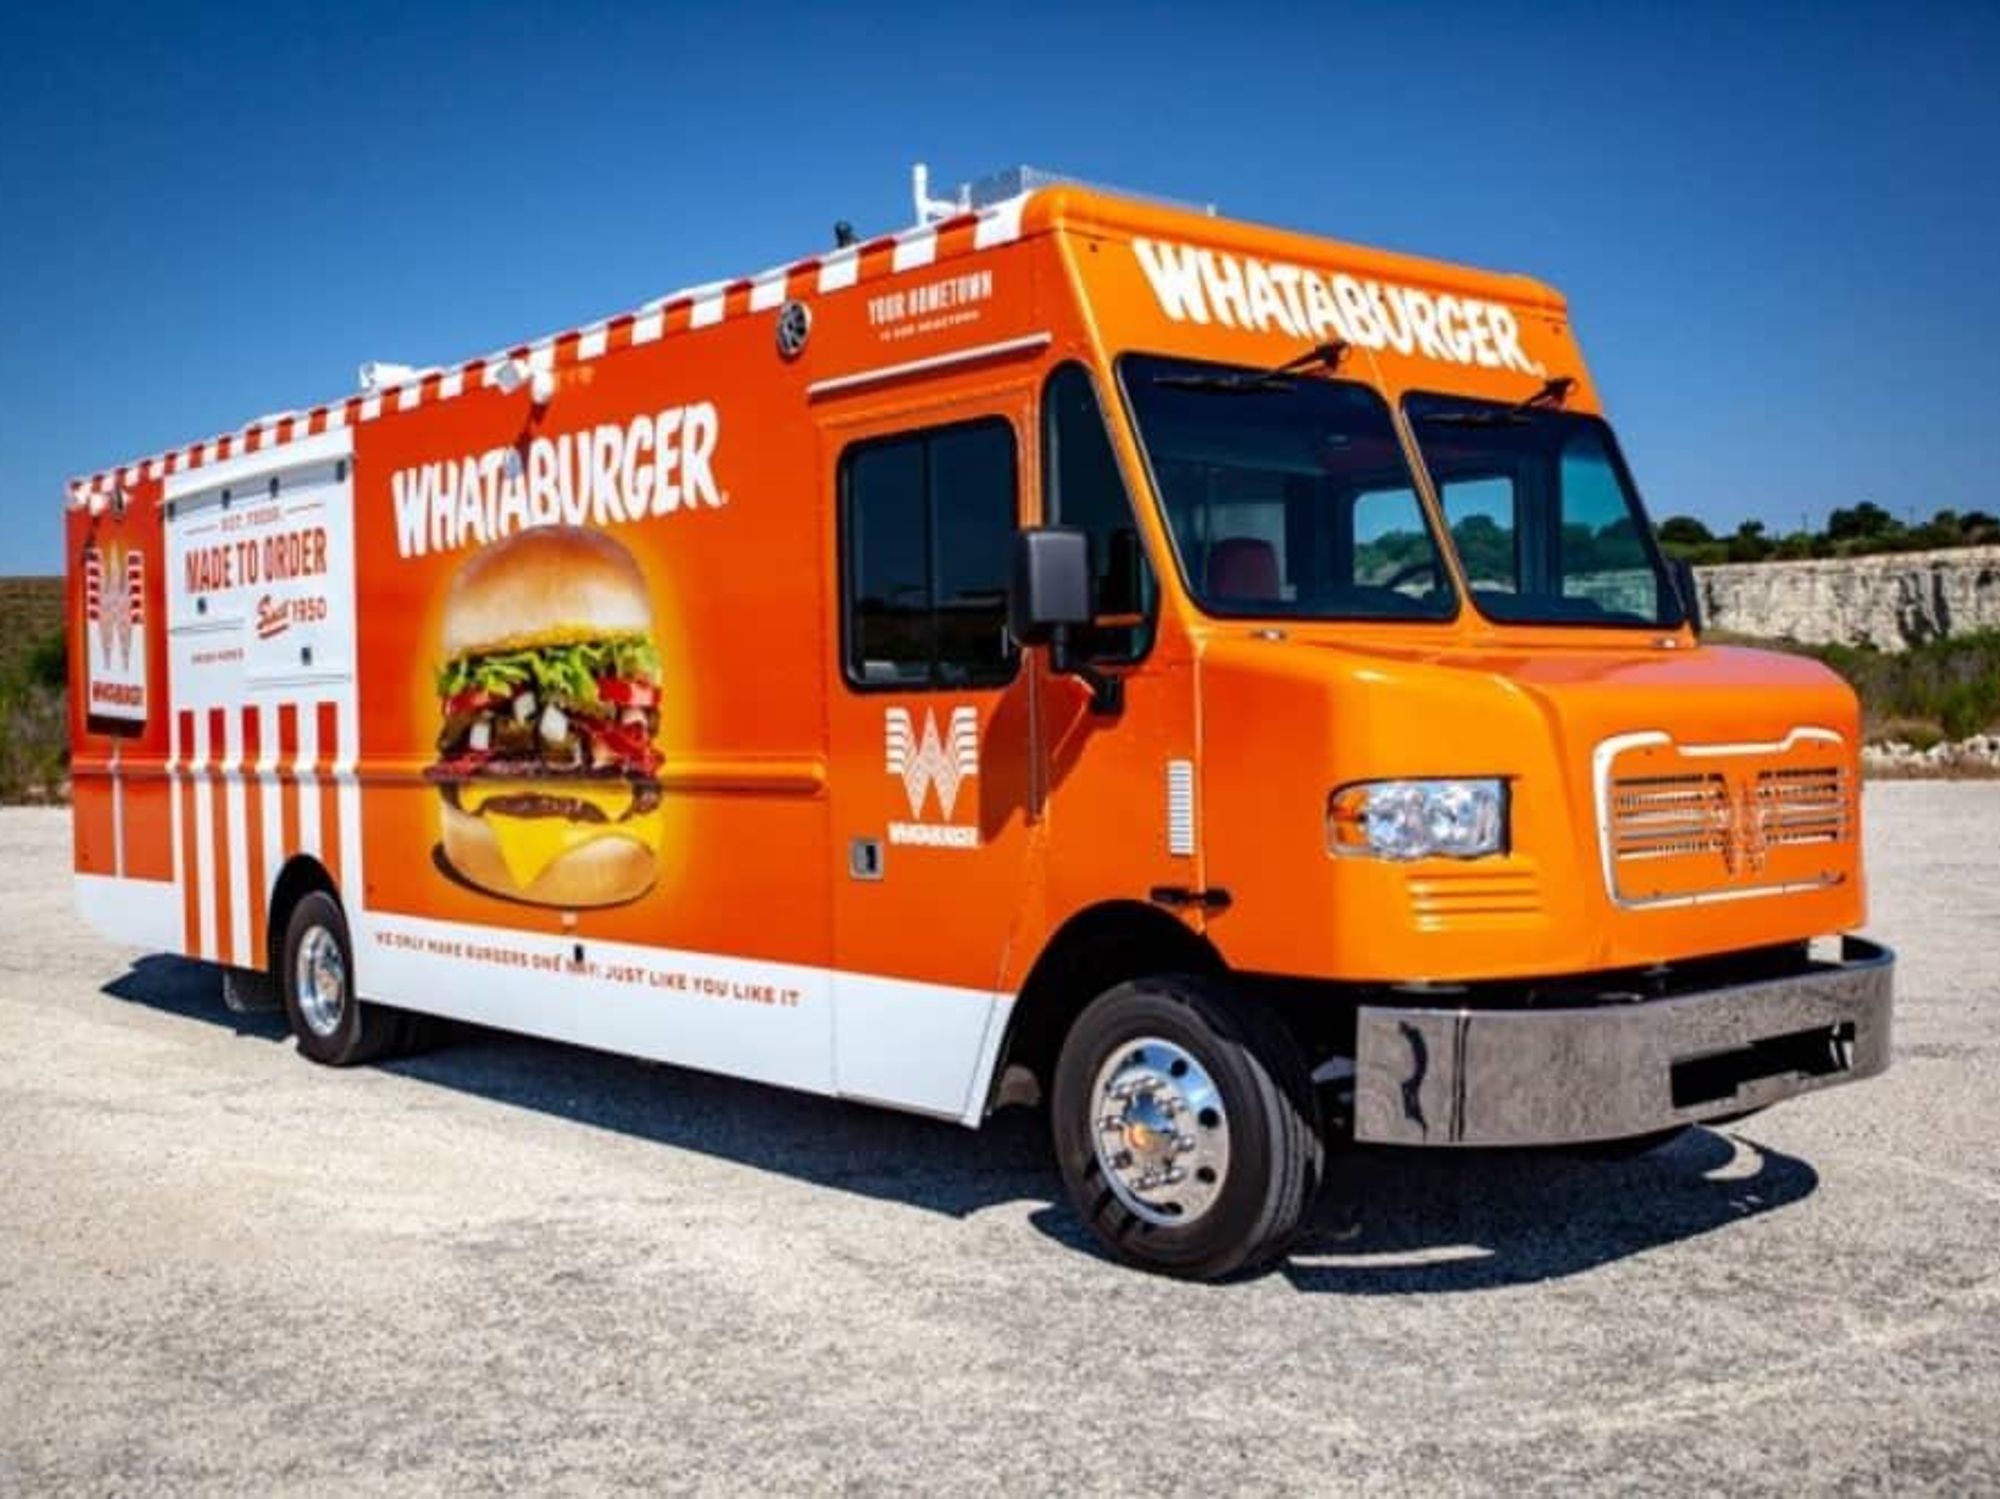 5 Facts About Whataburger - Rie Defined